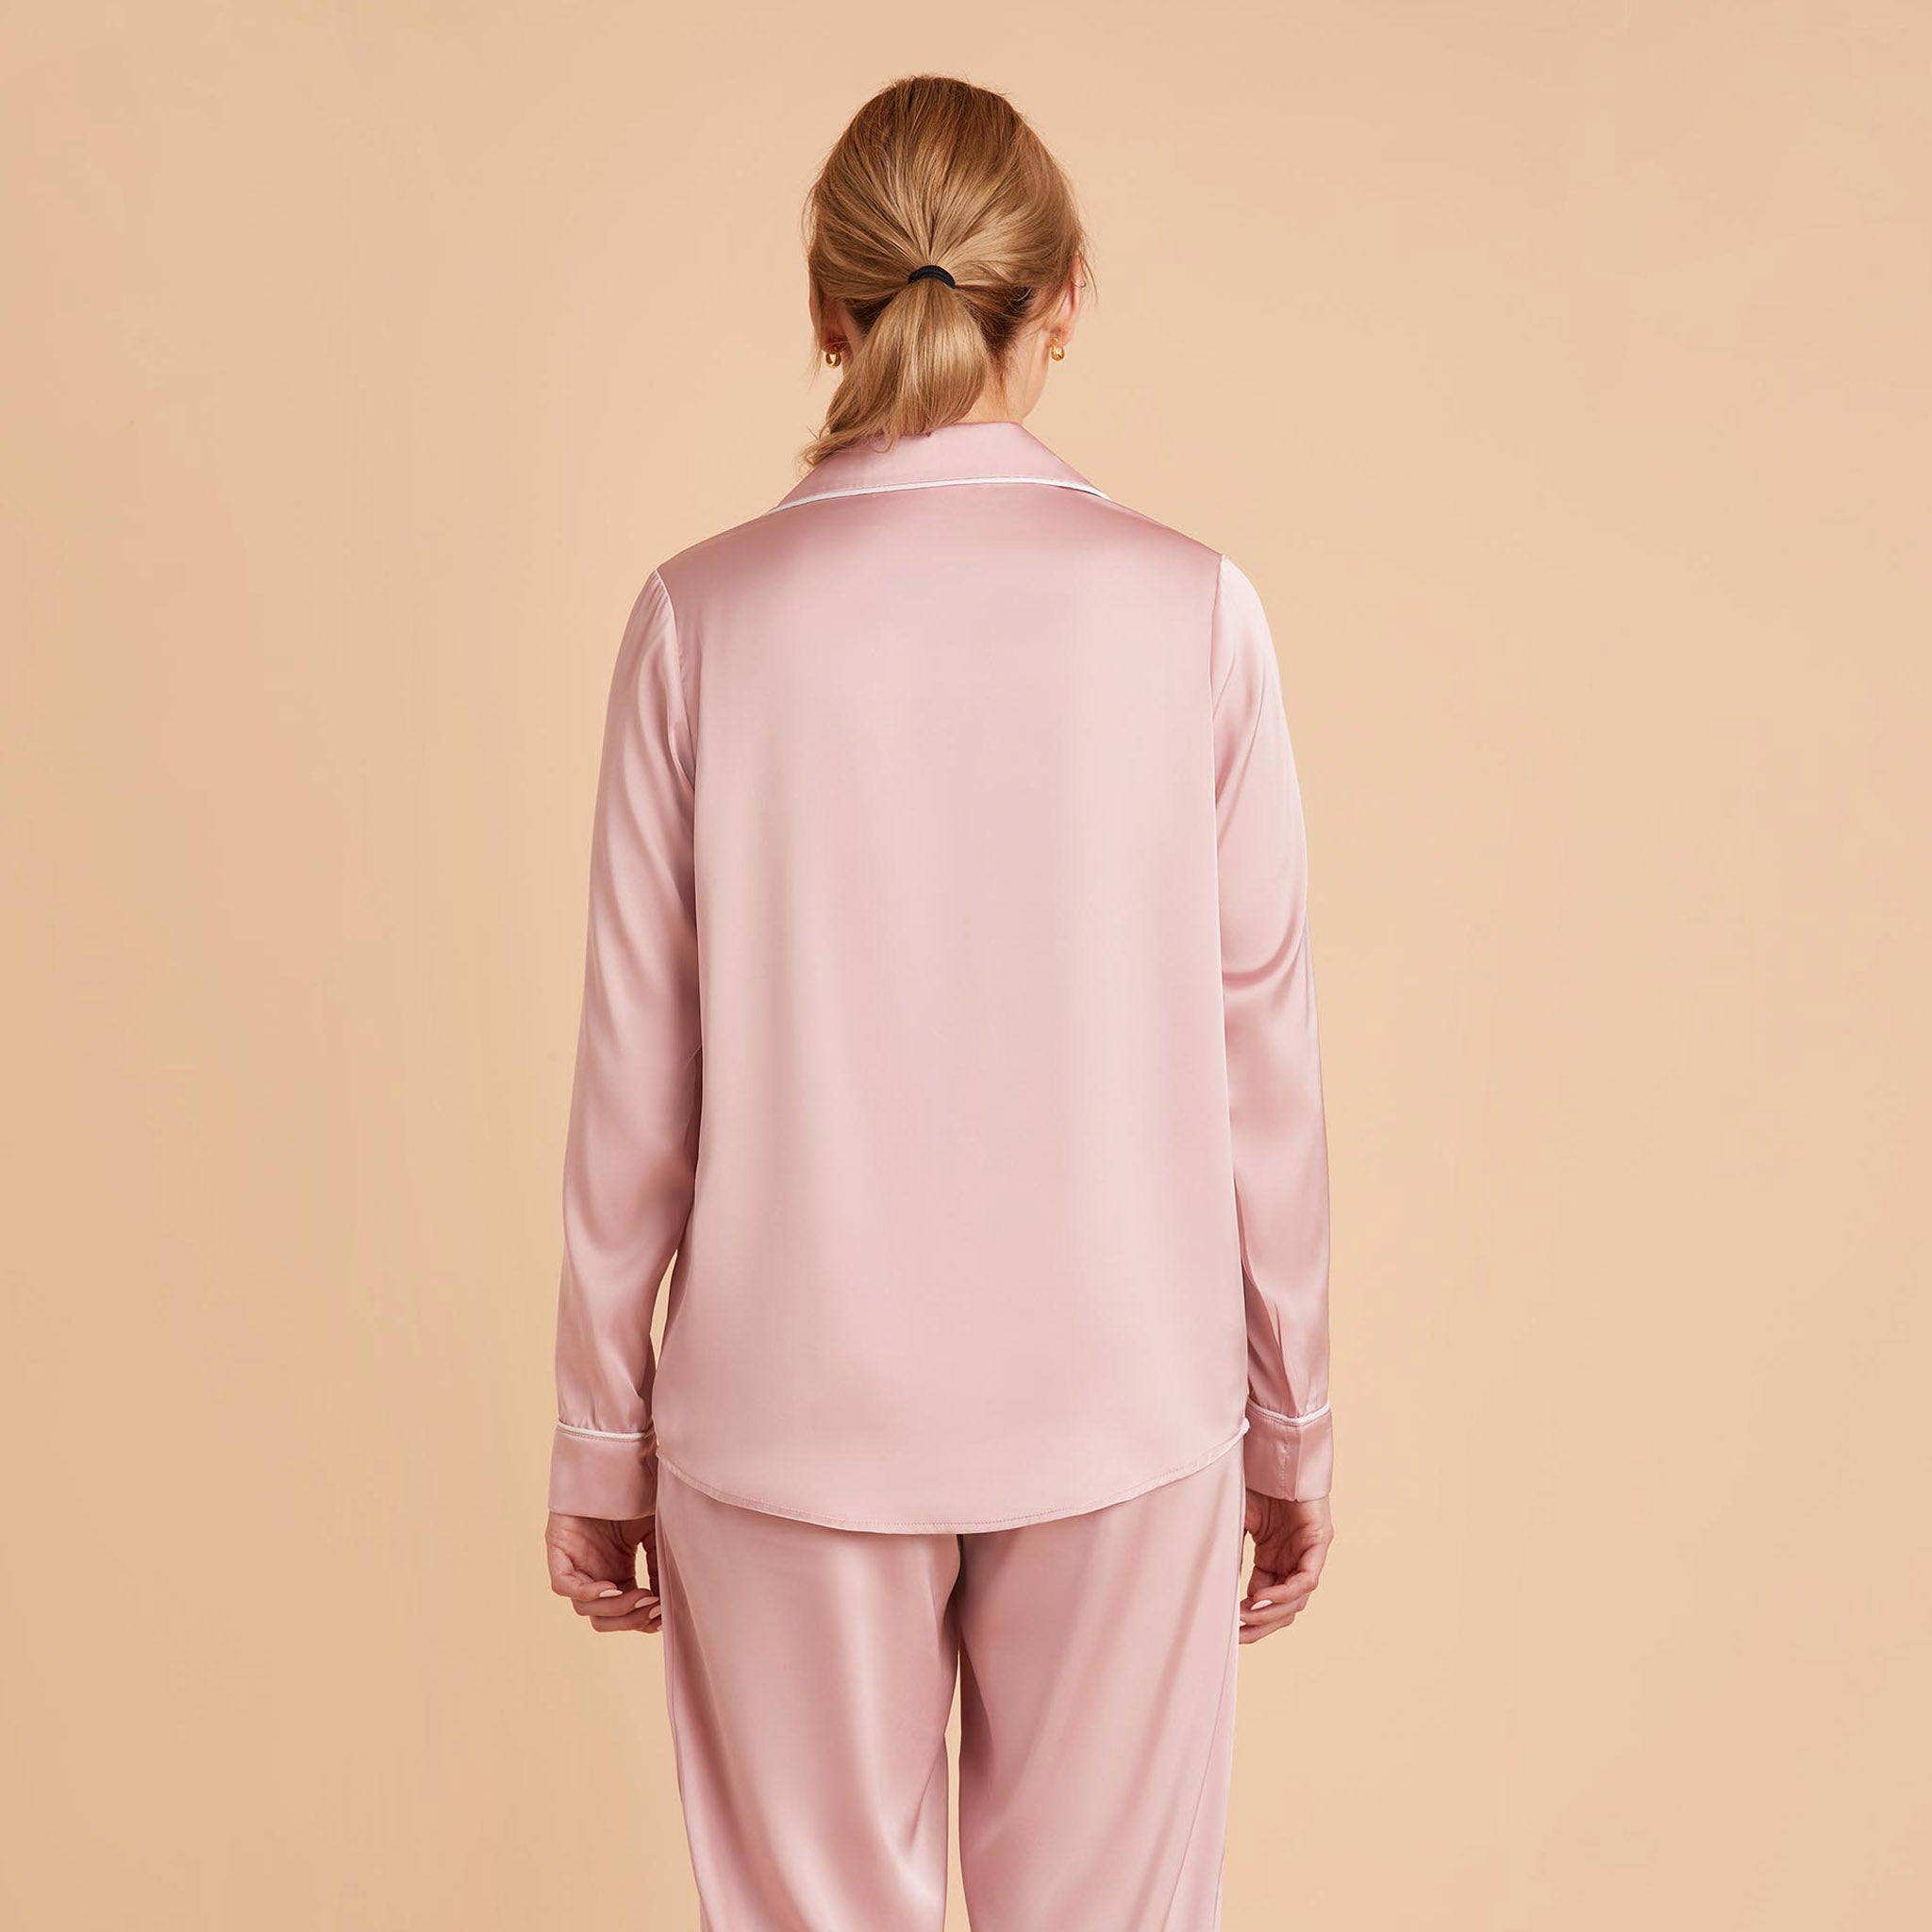 Jonny Satin Long Sleeve Pajama Top With White Piping in dusty pink, back view